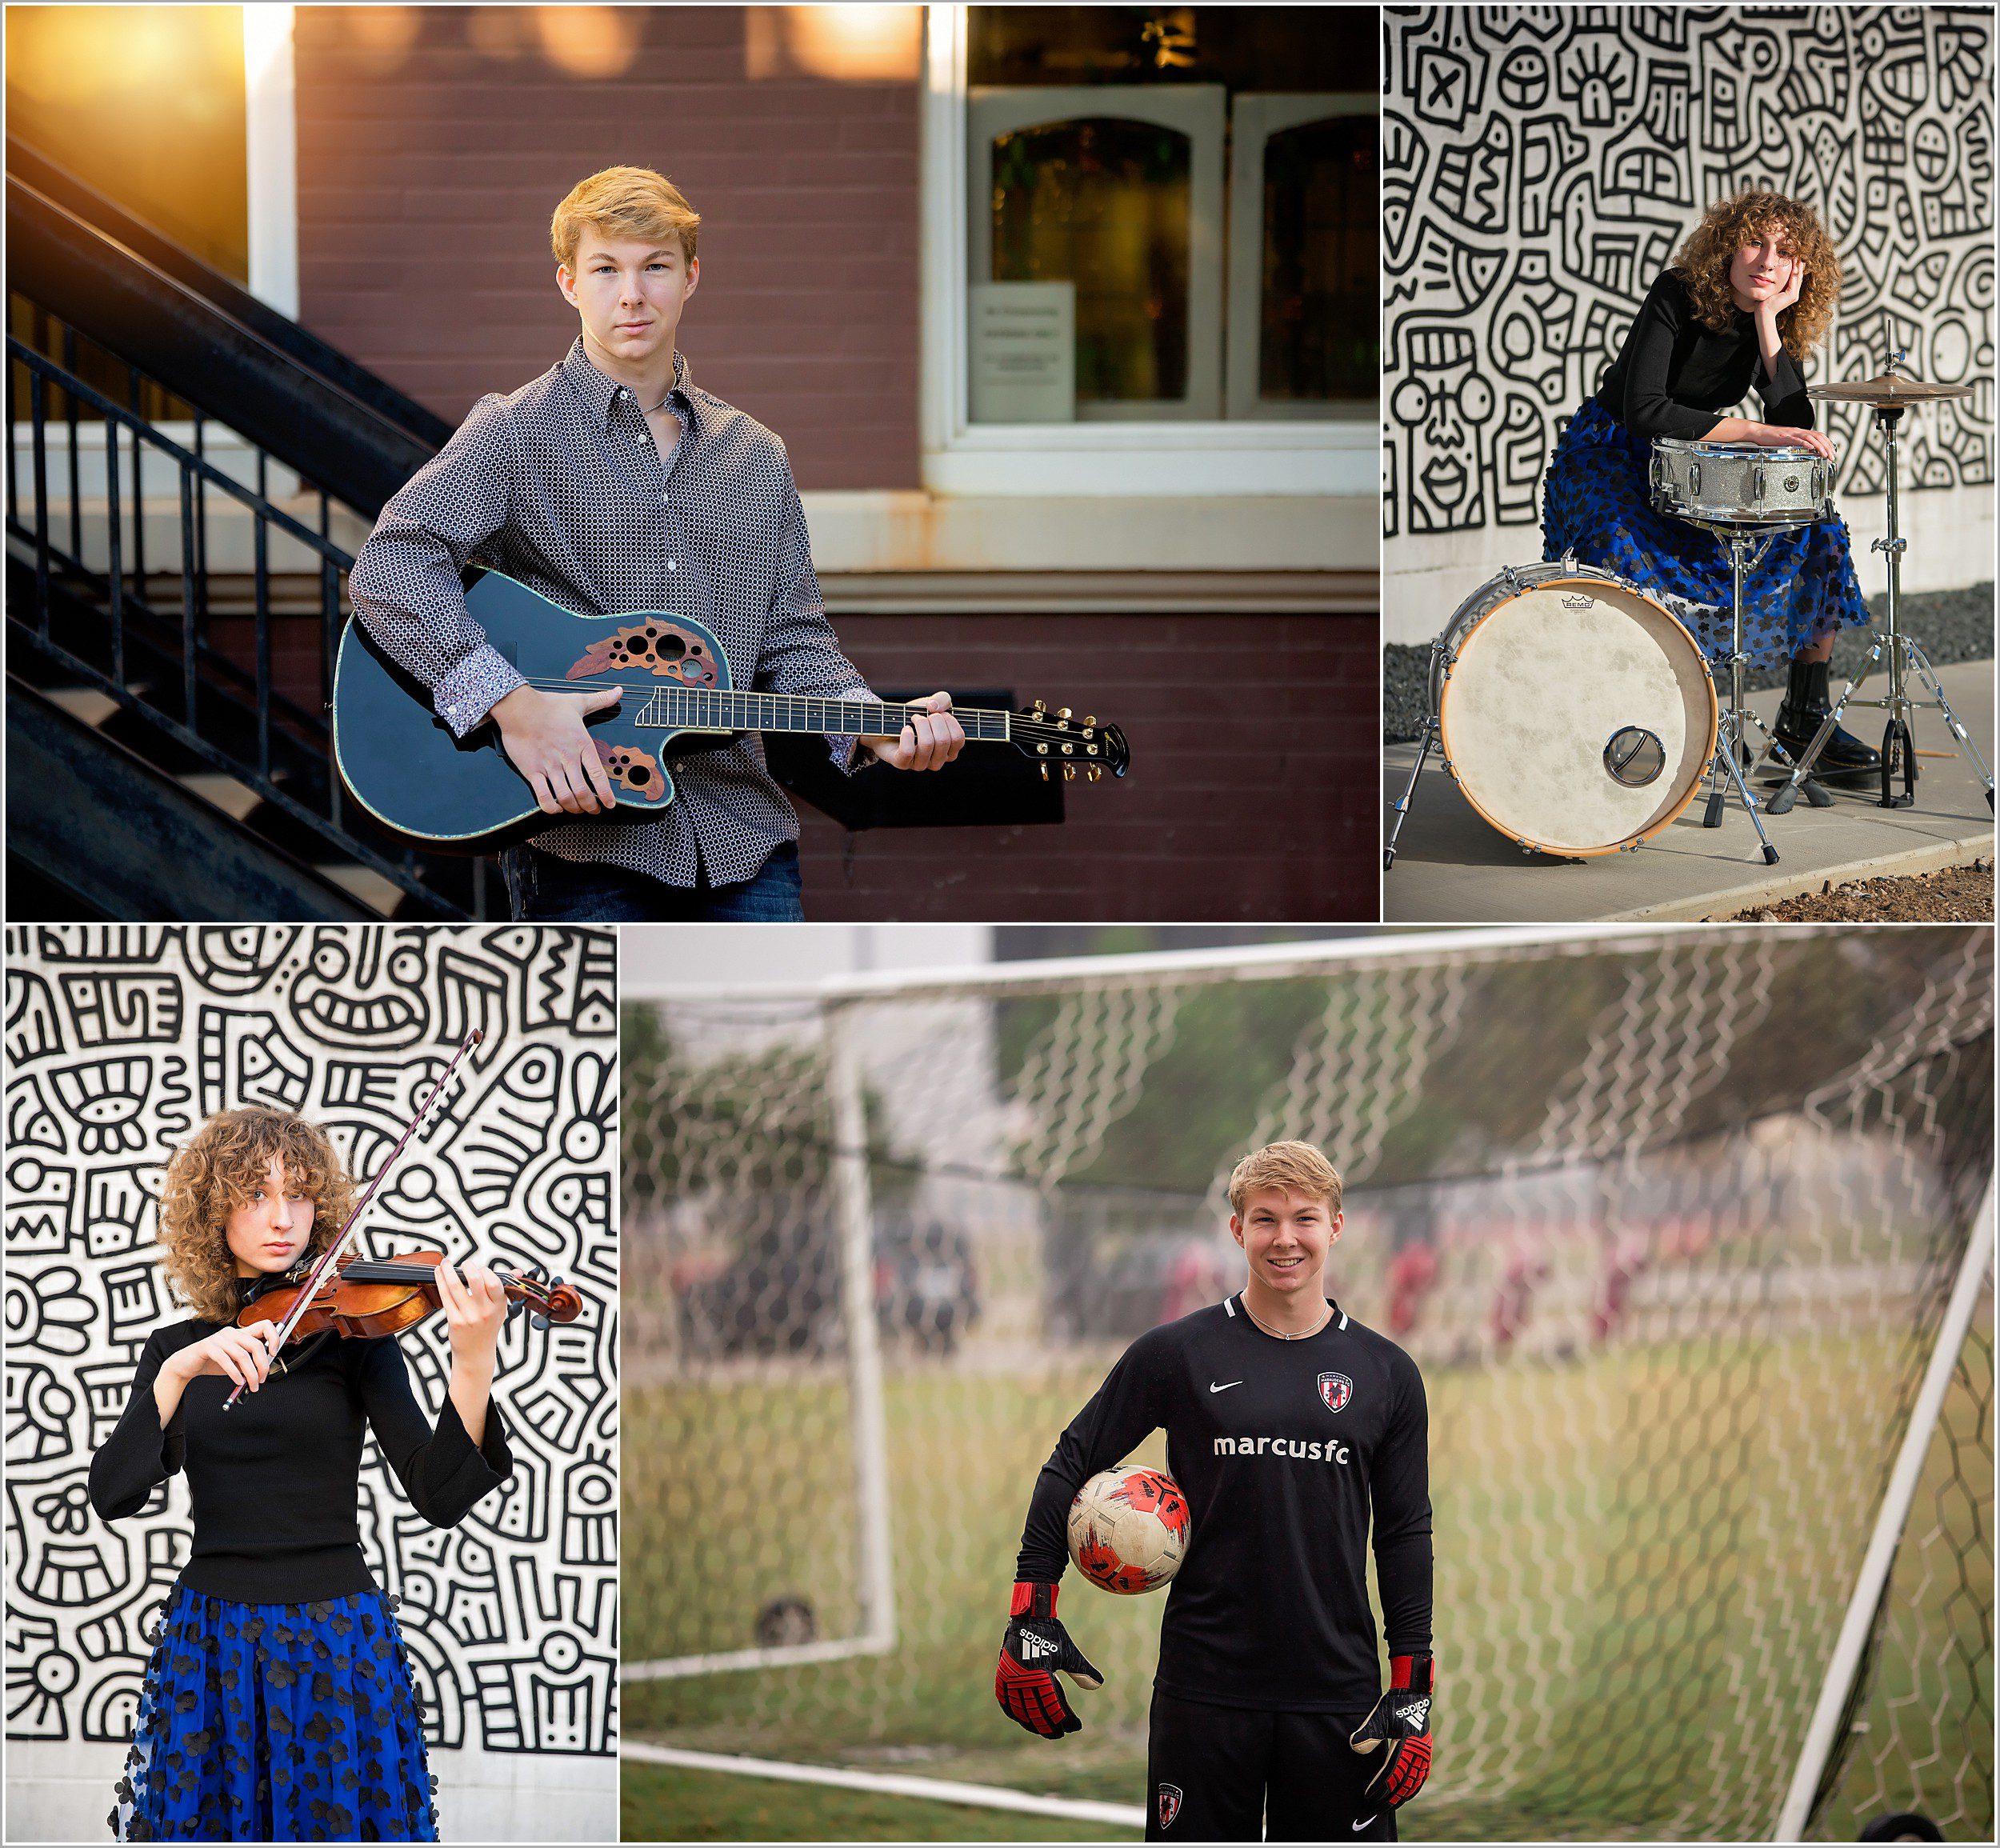 senior students with guitar, drums, violin and soccer ball